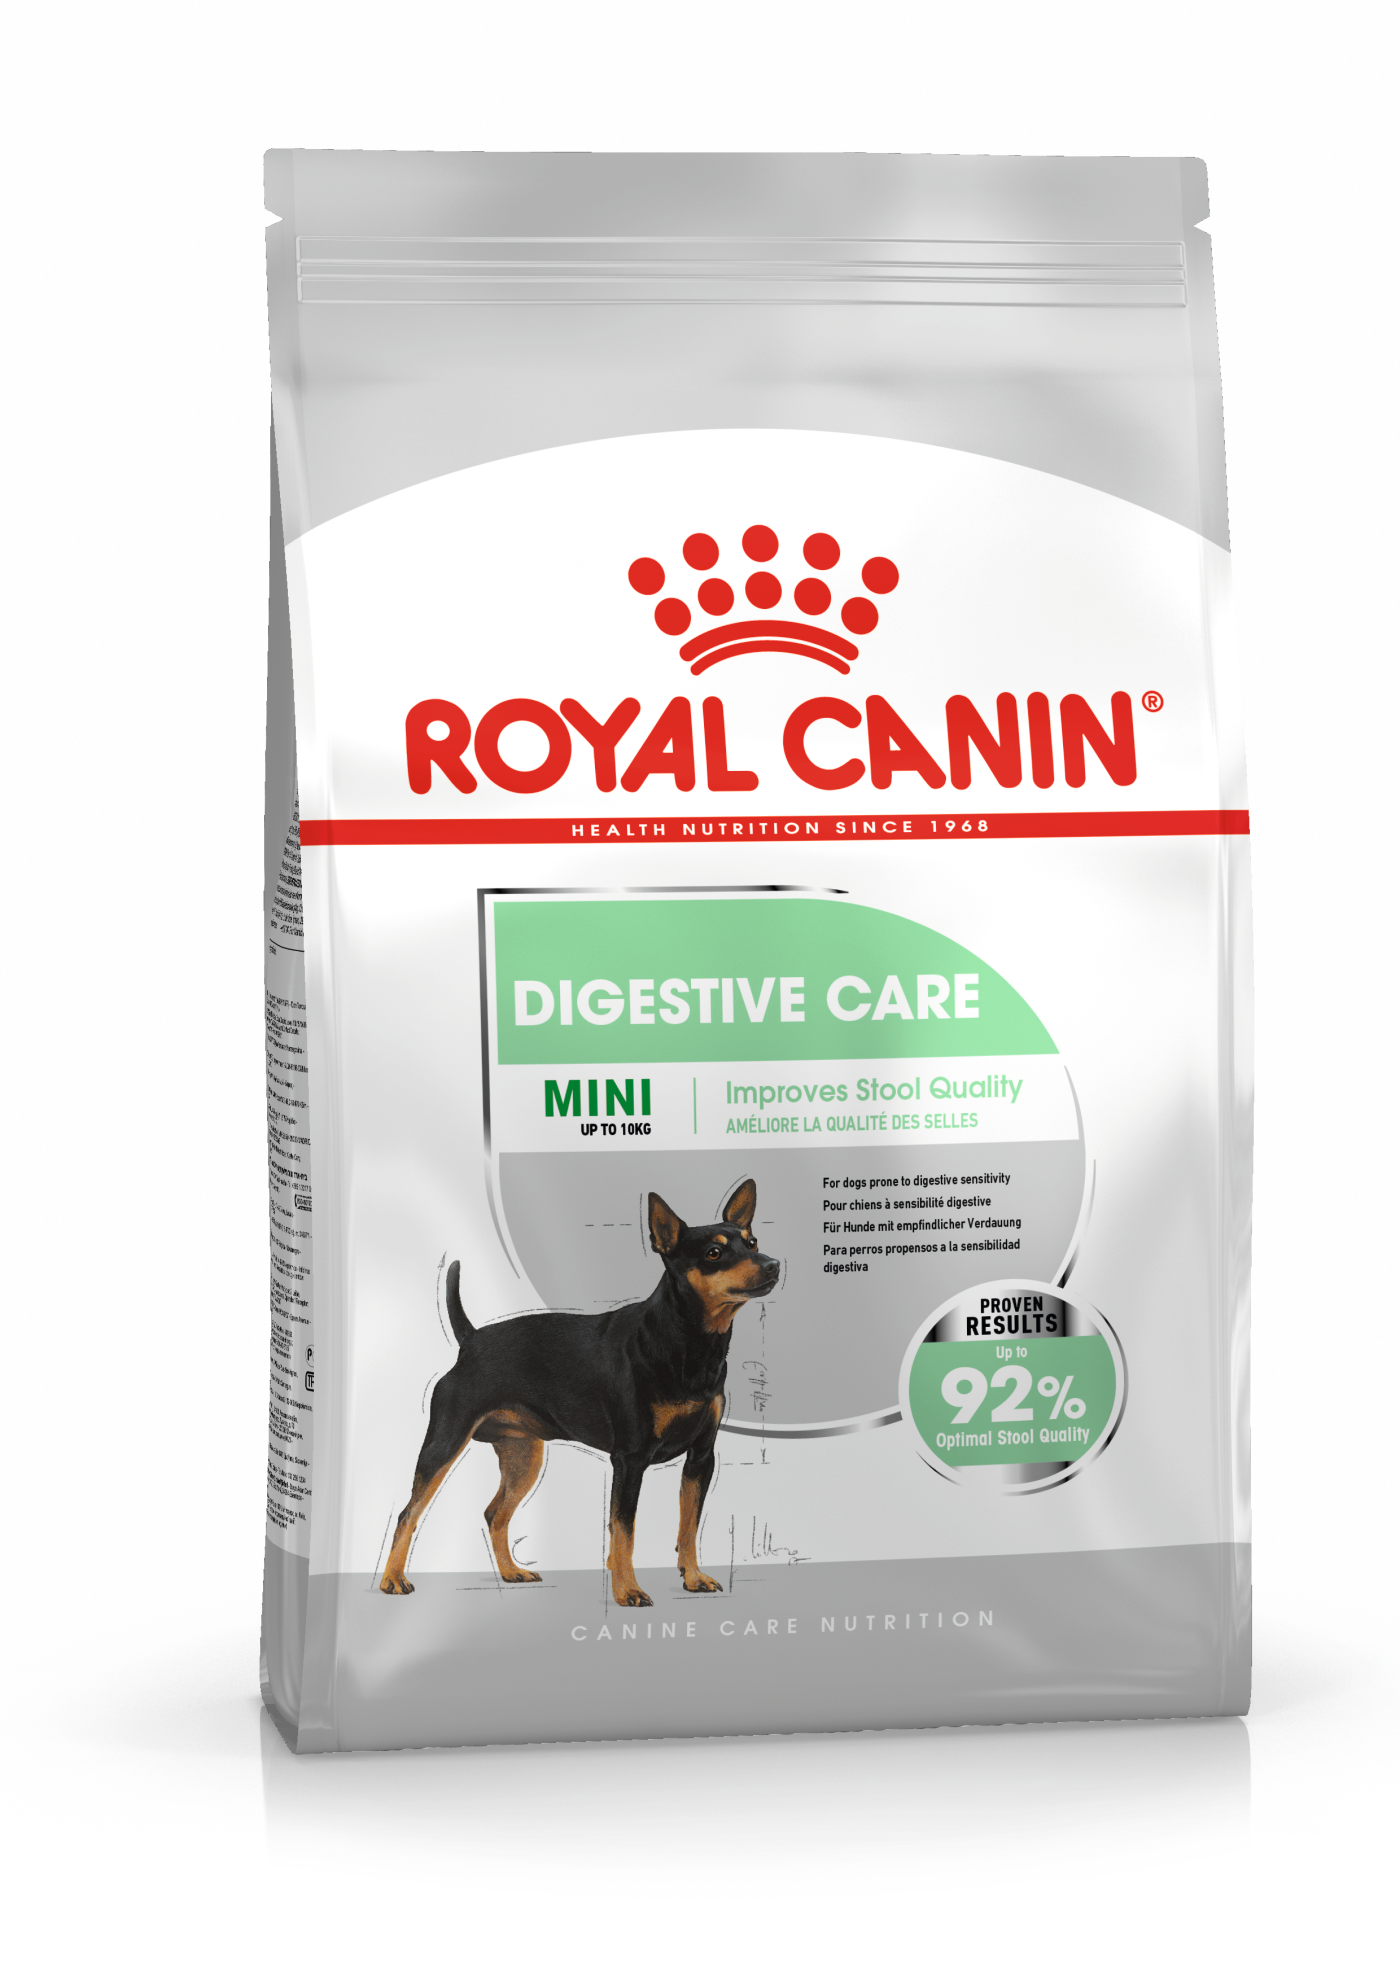 ROYAL CANIN &#x2122; CANINE CARE NUTRITION Mini Digestive Care Dry Pet Food for Dog